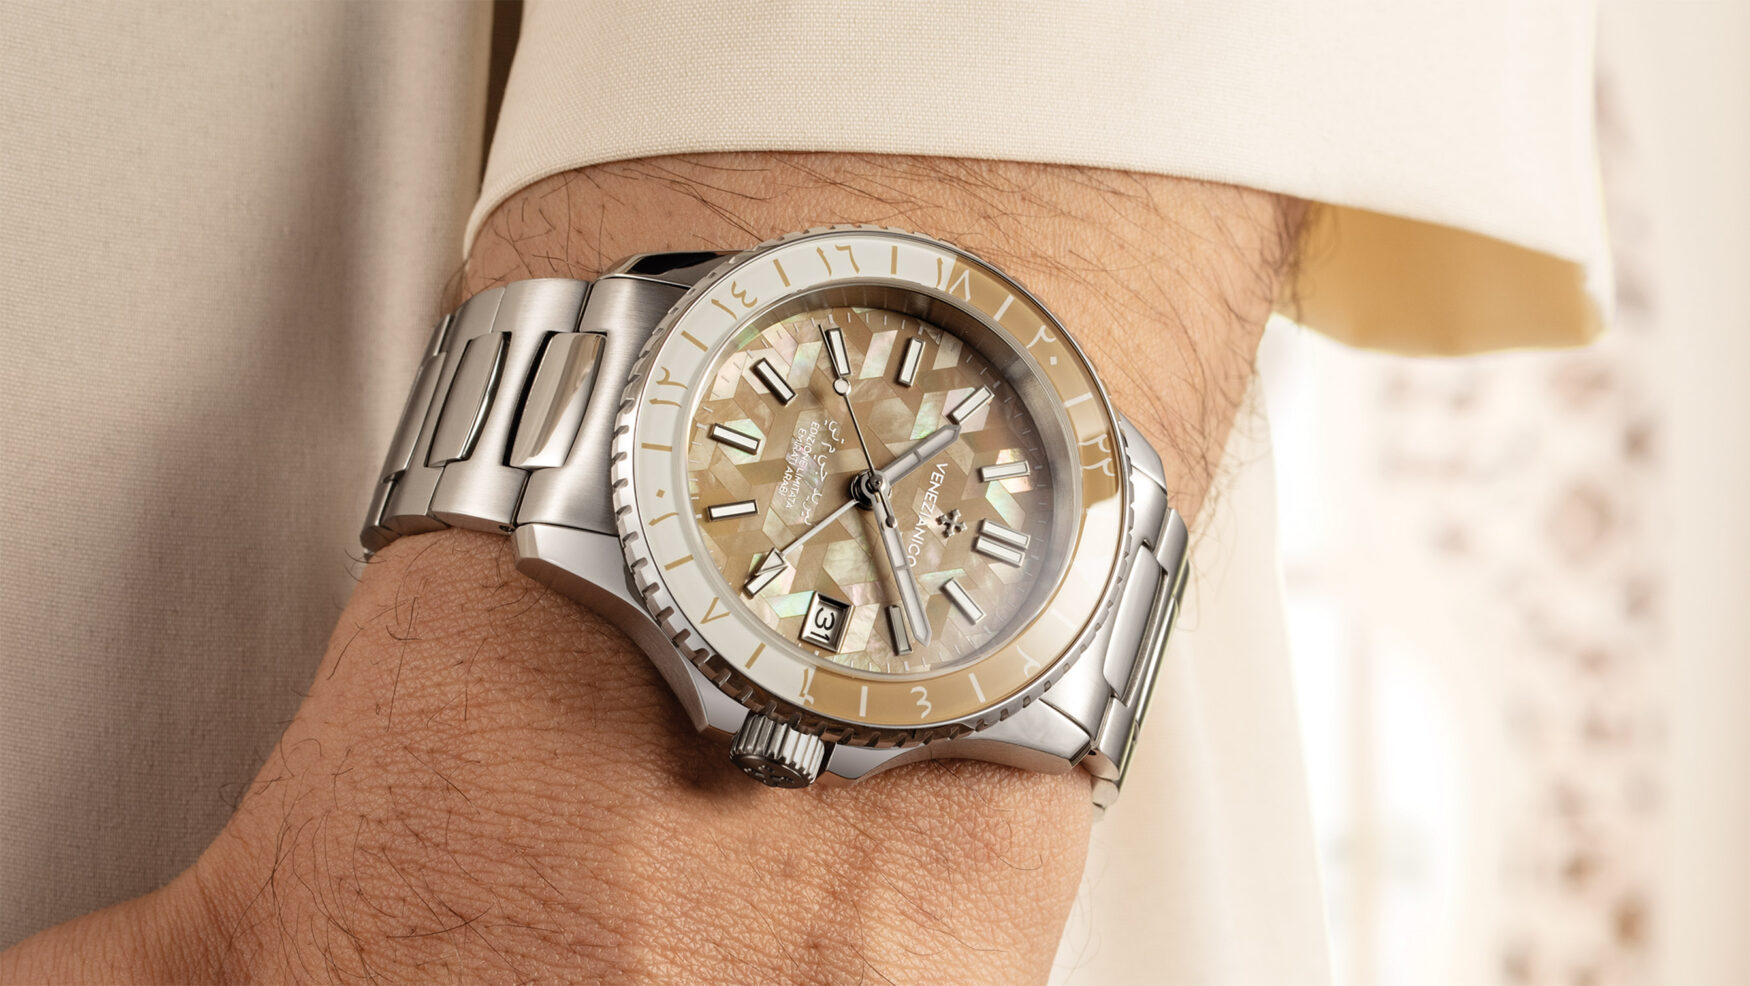 New releases from Rolex, Fleming, Venezianico and more